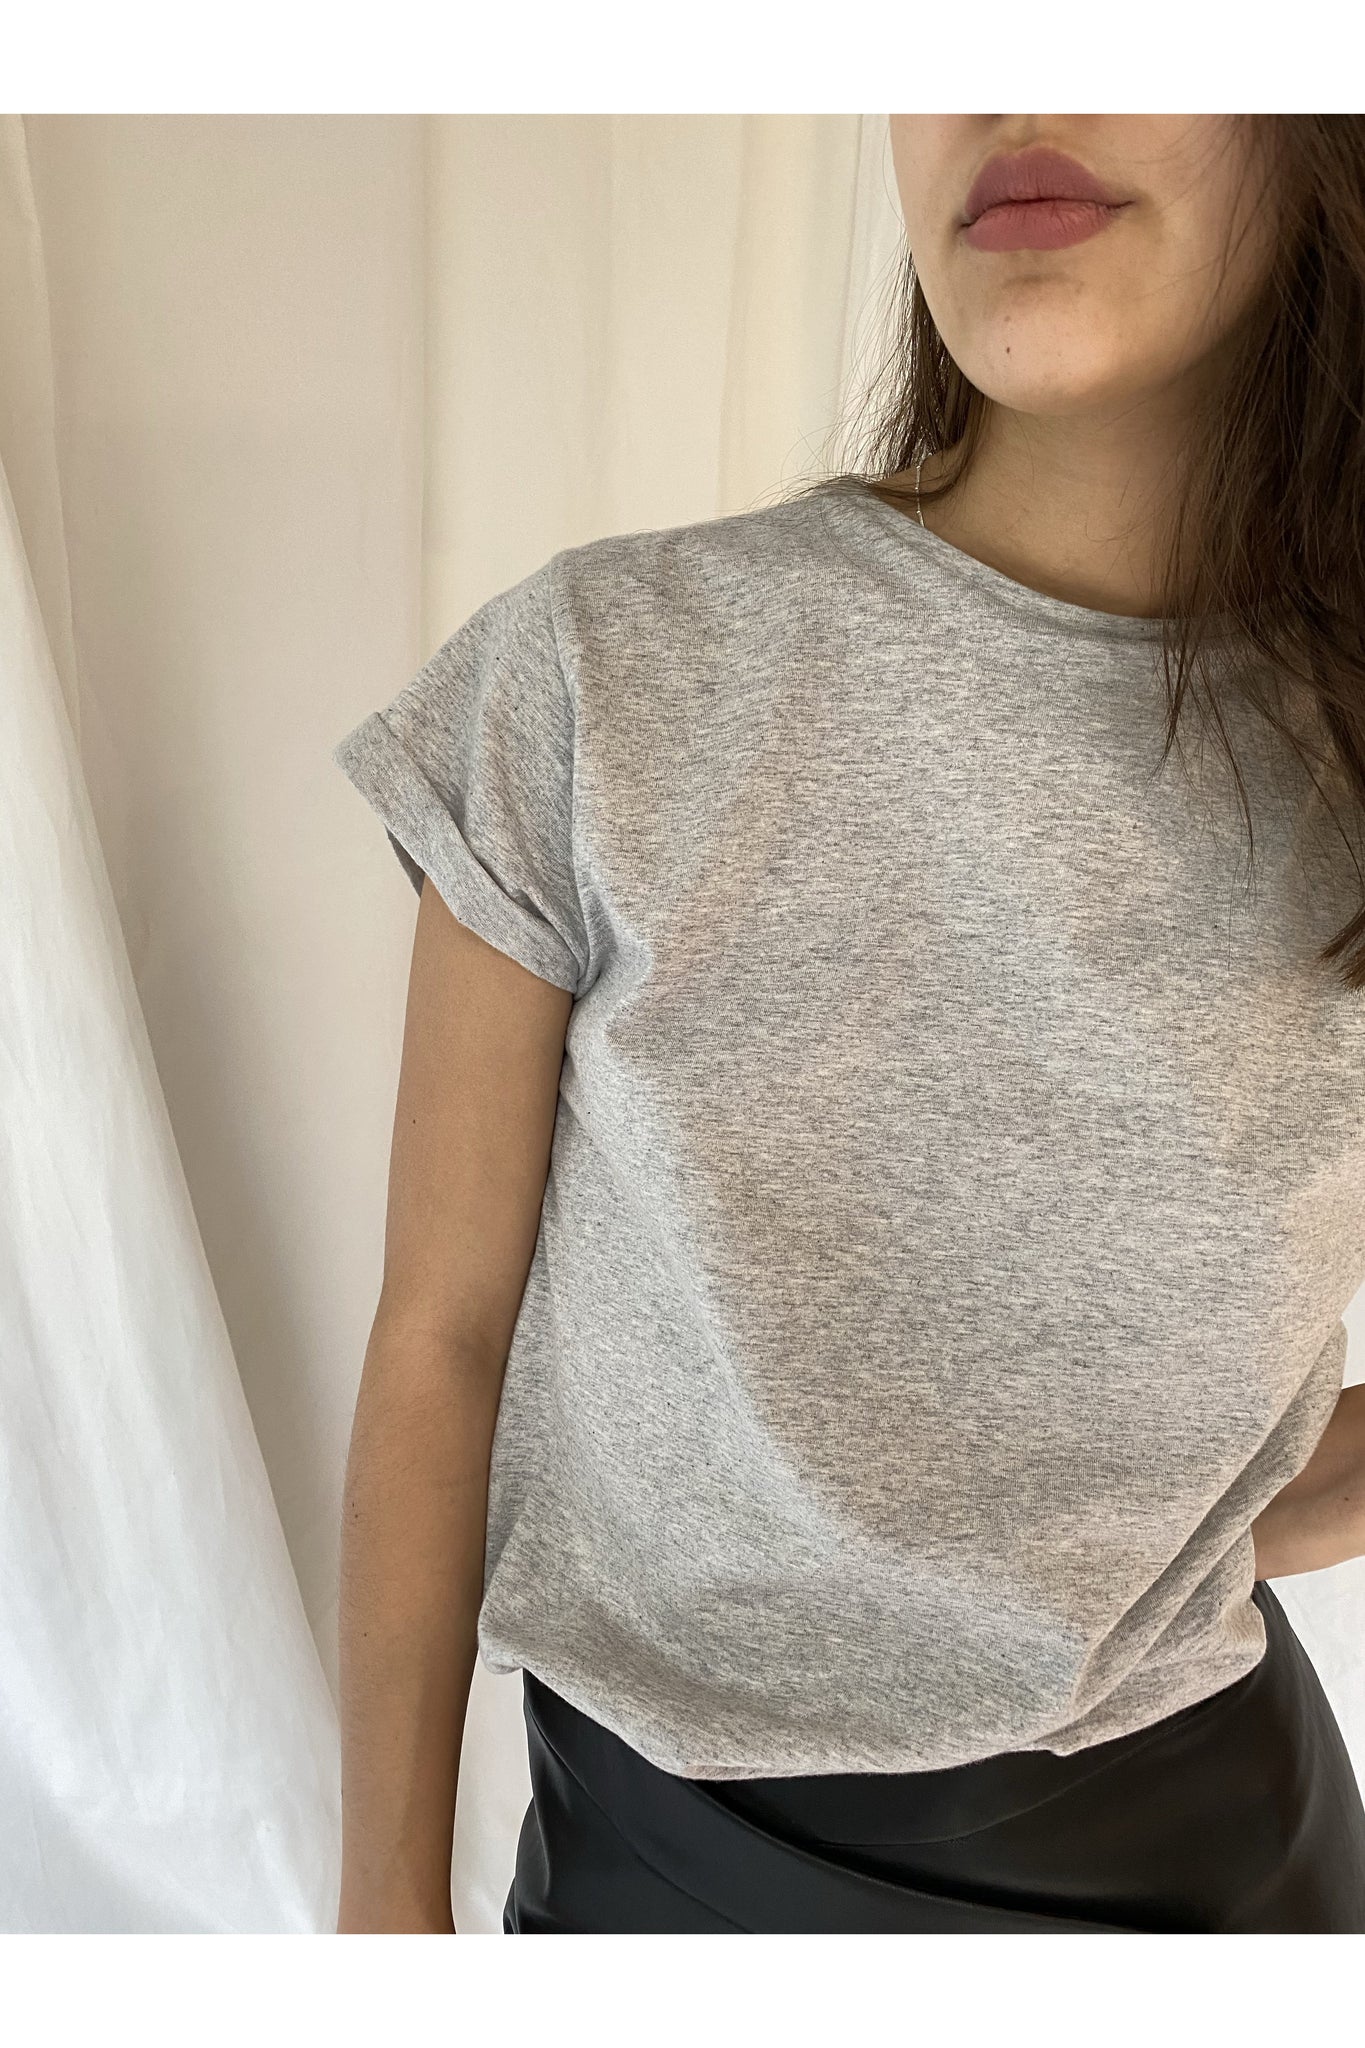 PERFECT ROLLED SLEEVES SHIRT IN GREY - BEYOND STUDIOS